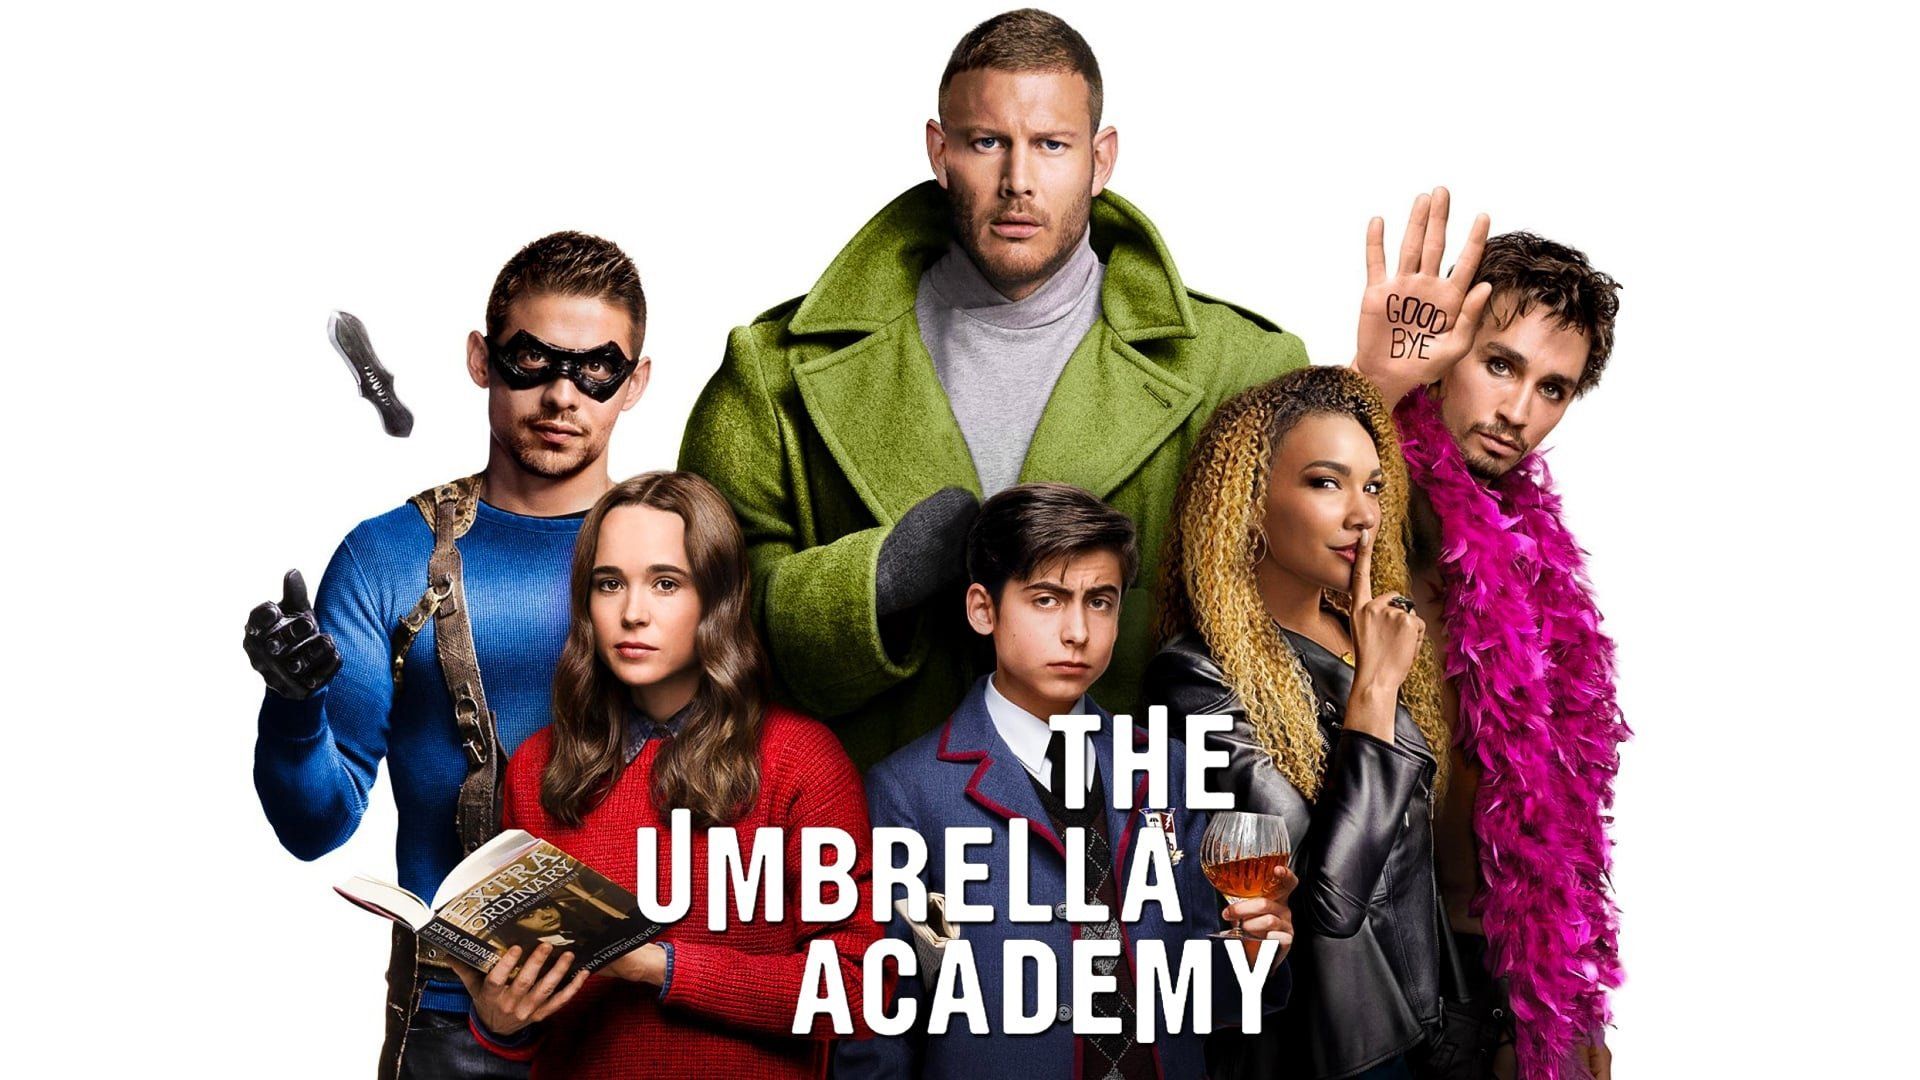 The Umbrella Academy 2 Poster Wallpapers